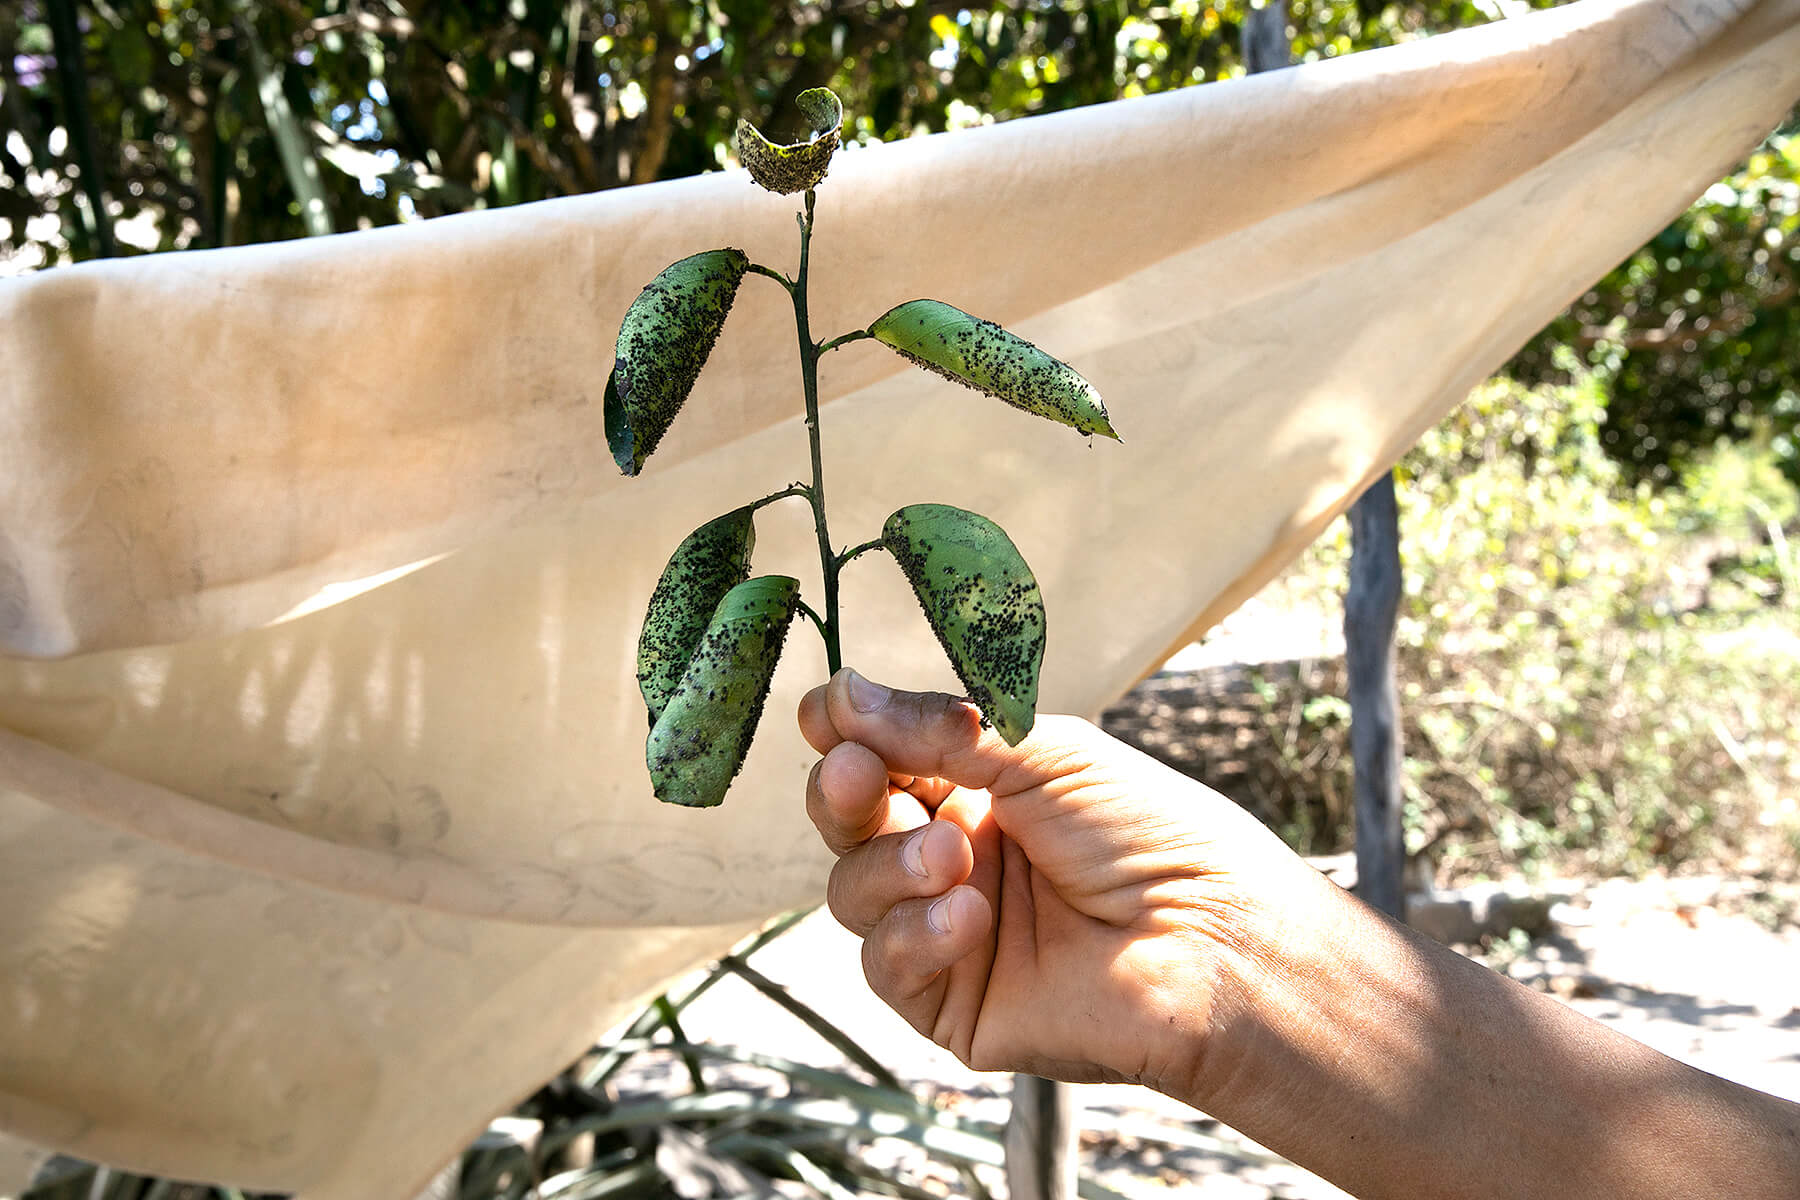 João Henrique Pereira Mendes Jr's wife shows us the leaves of a sick tree. She says this is due to the pesticides the nearby 'fazendas' use.